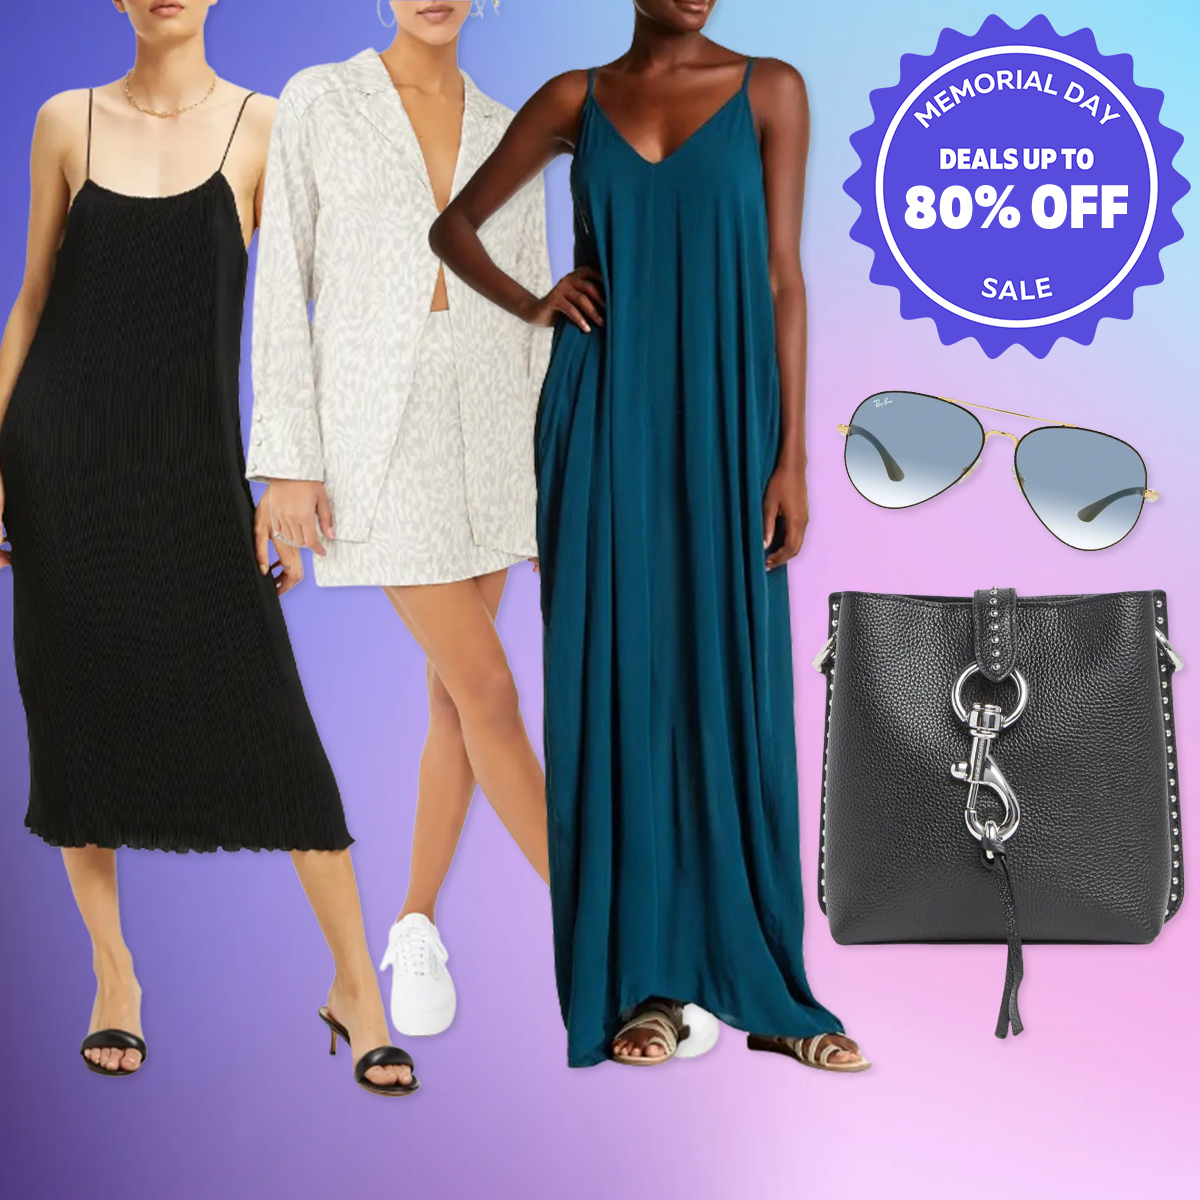 Nordstrom Rack Clear the Rack Sale: Shop Ray-Ban, Good American & More